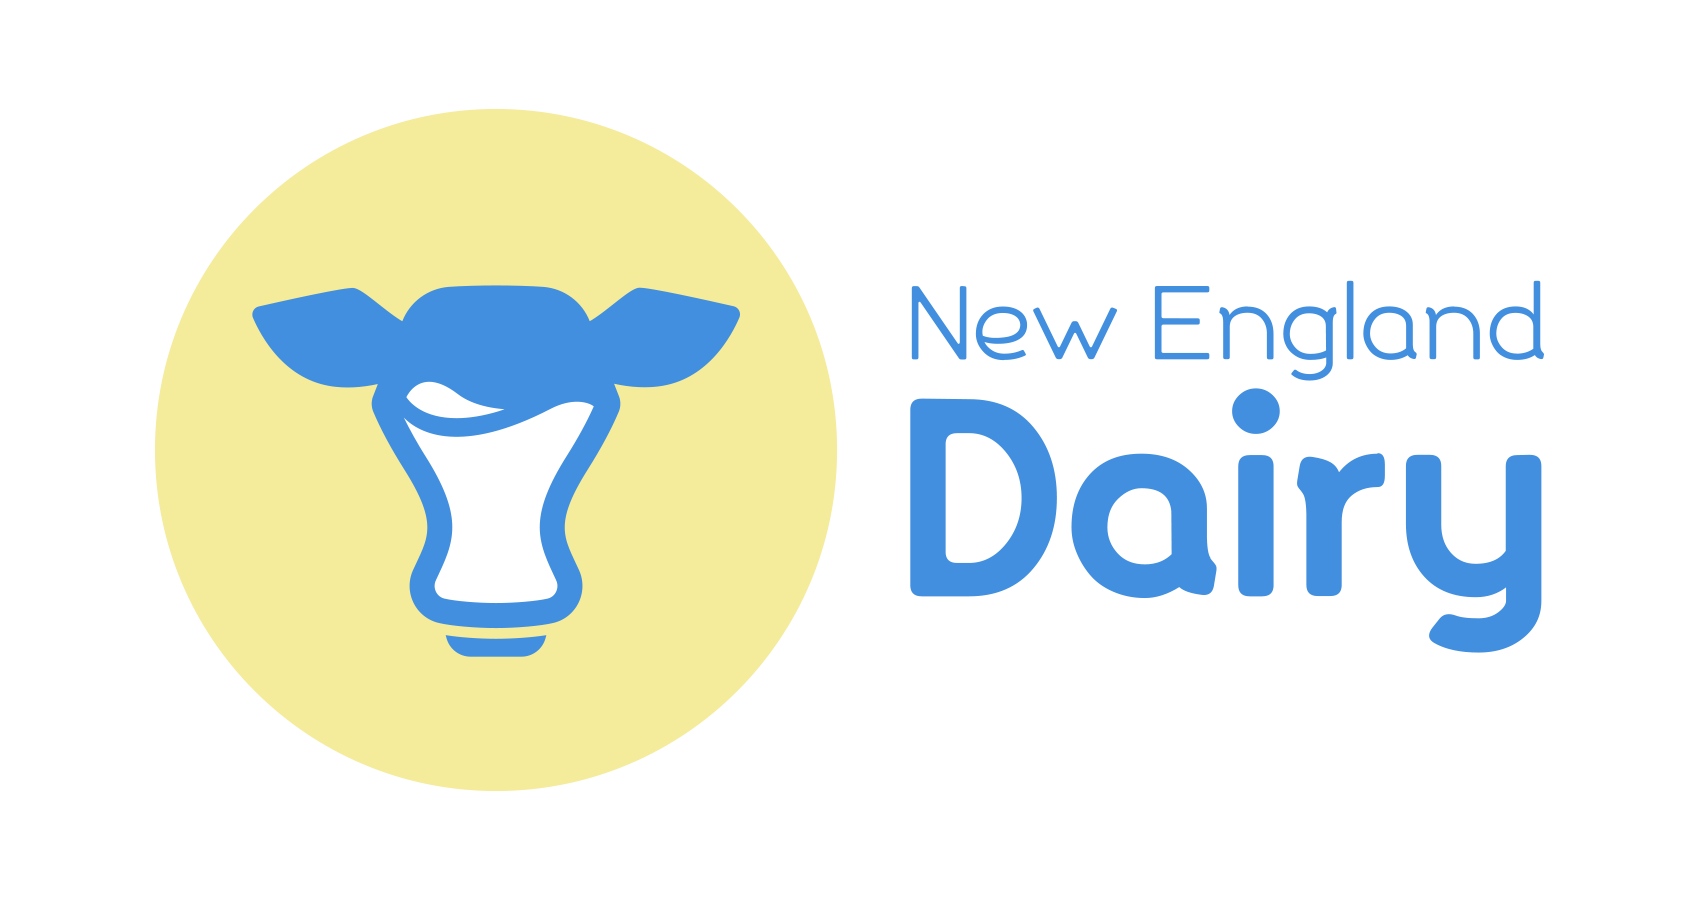 https://www.newenglanddairy.com/wp-content/uploads/NED_logo_full-color.png